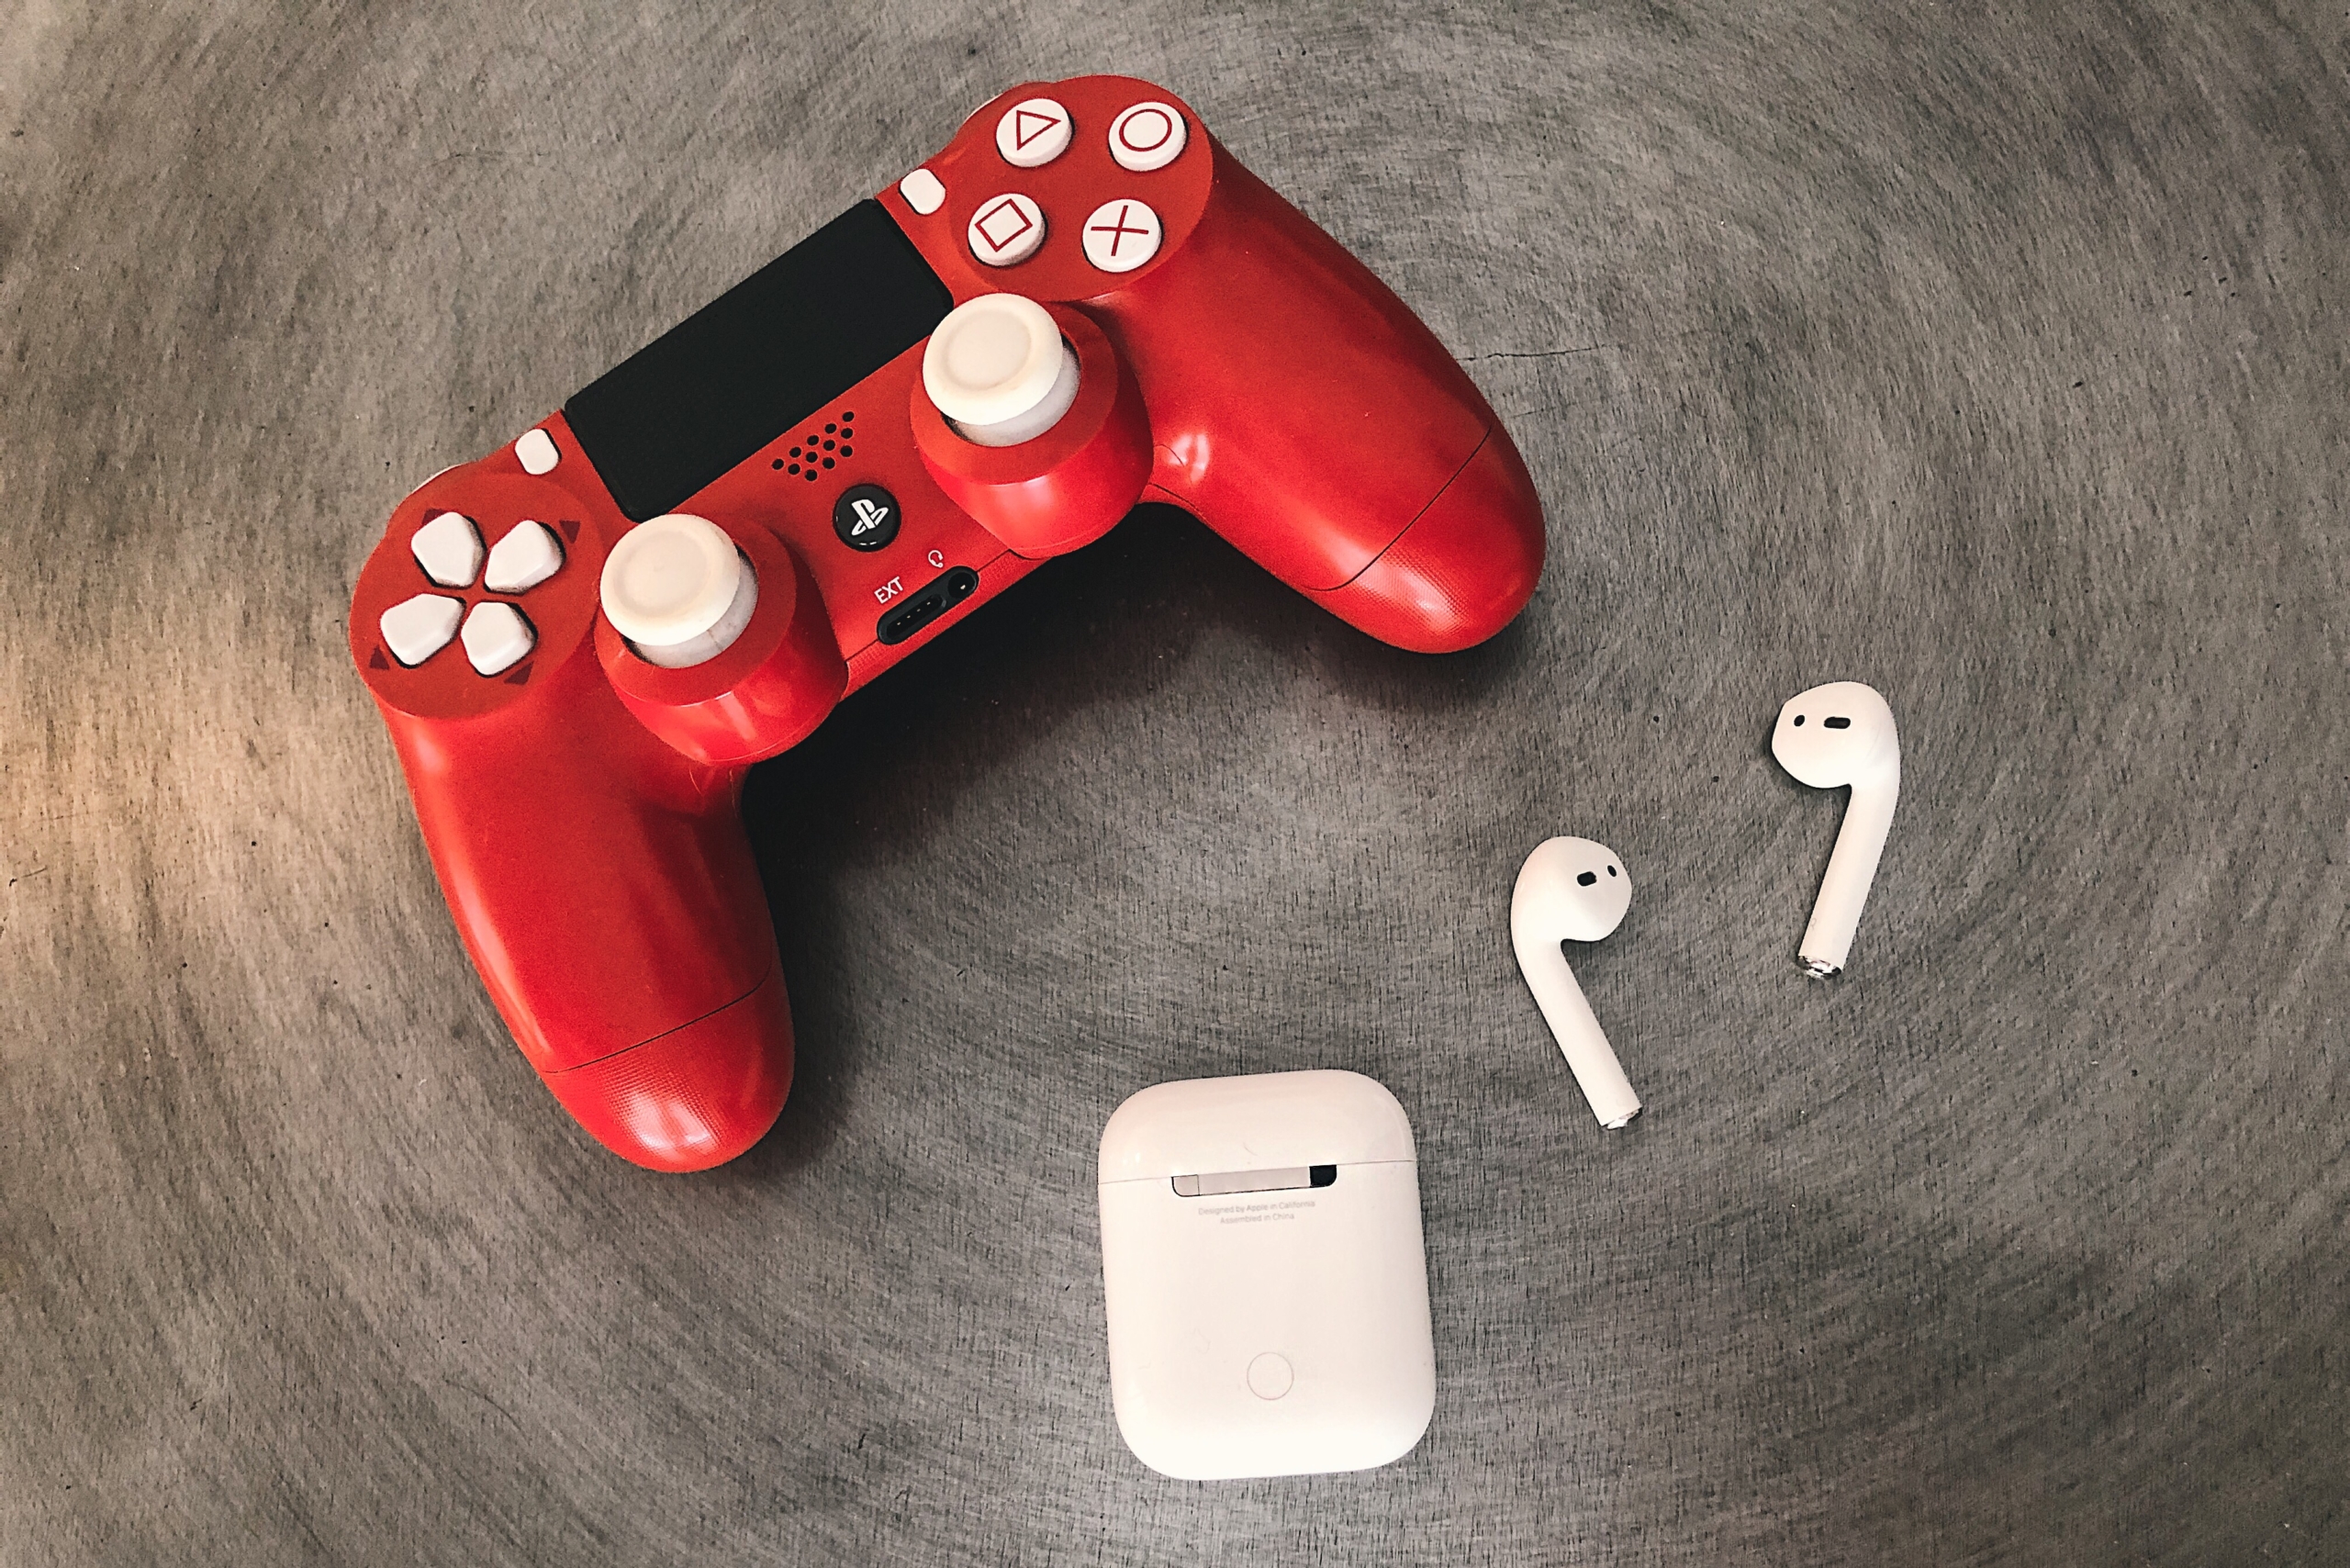 vervorming Hardheid binnenkomst How to Connect Your AirPods to Your PS4 | Digital Trends